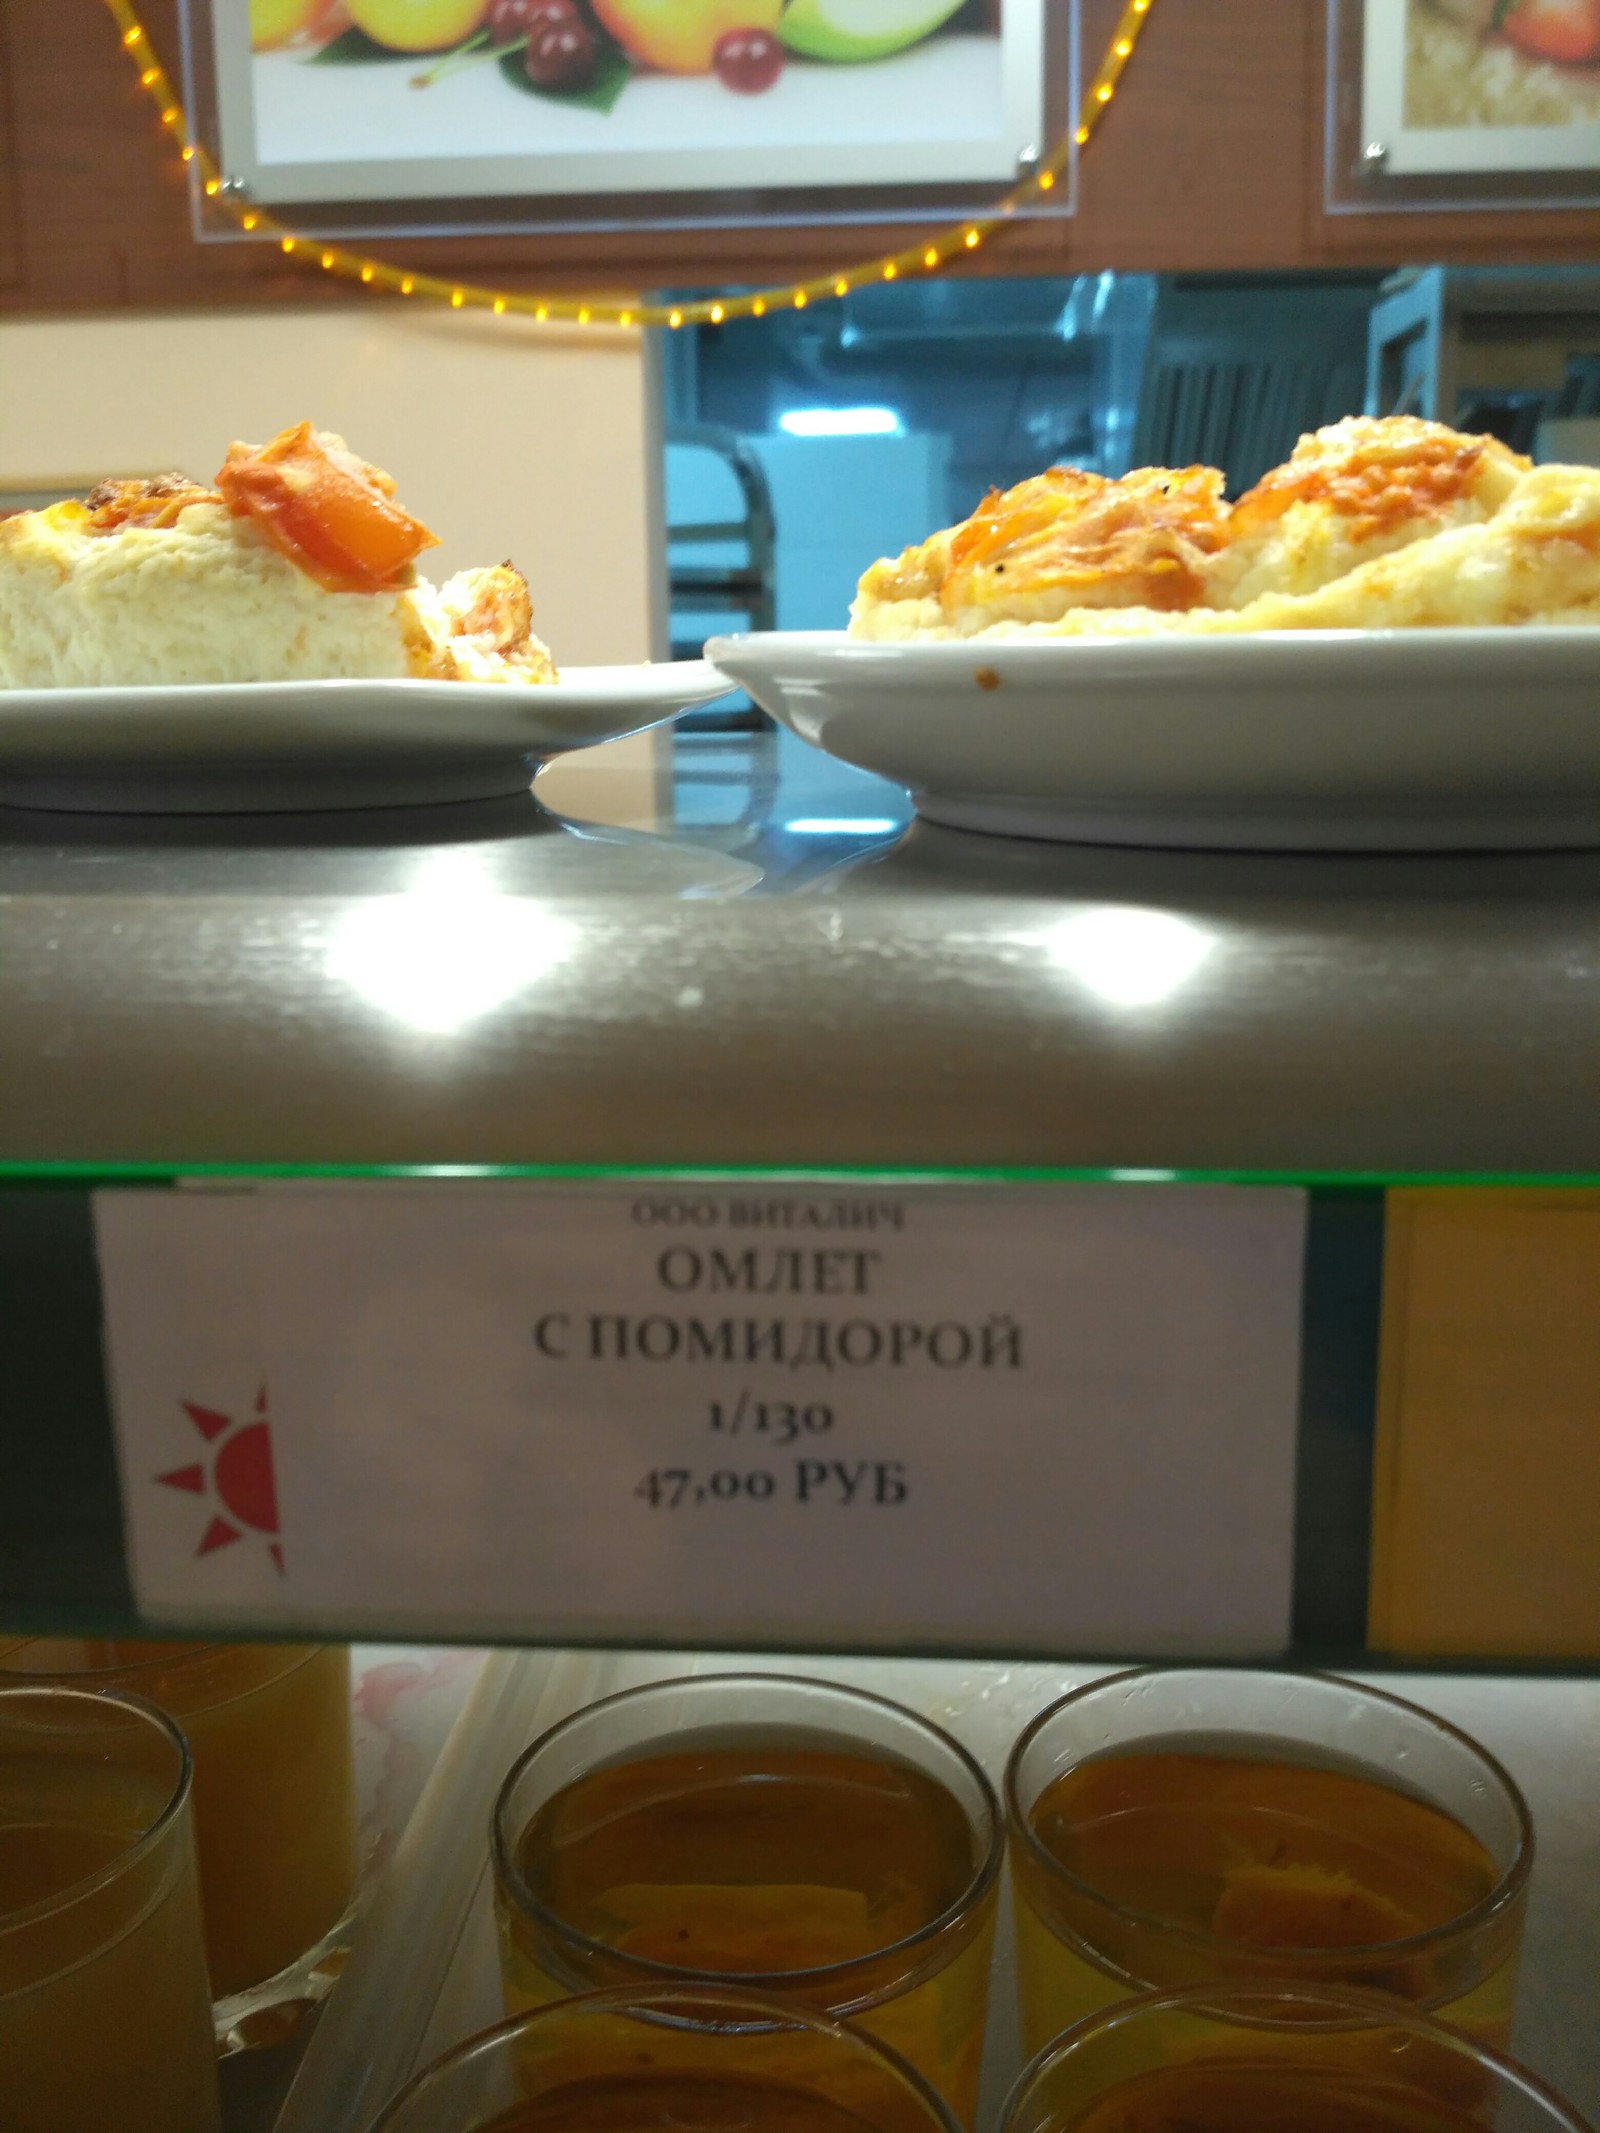 When everything is in its place - Russian language, Canteen, My